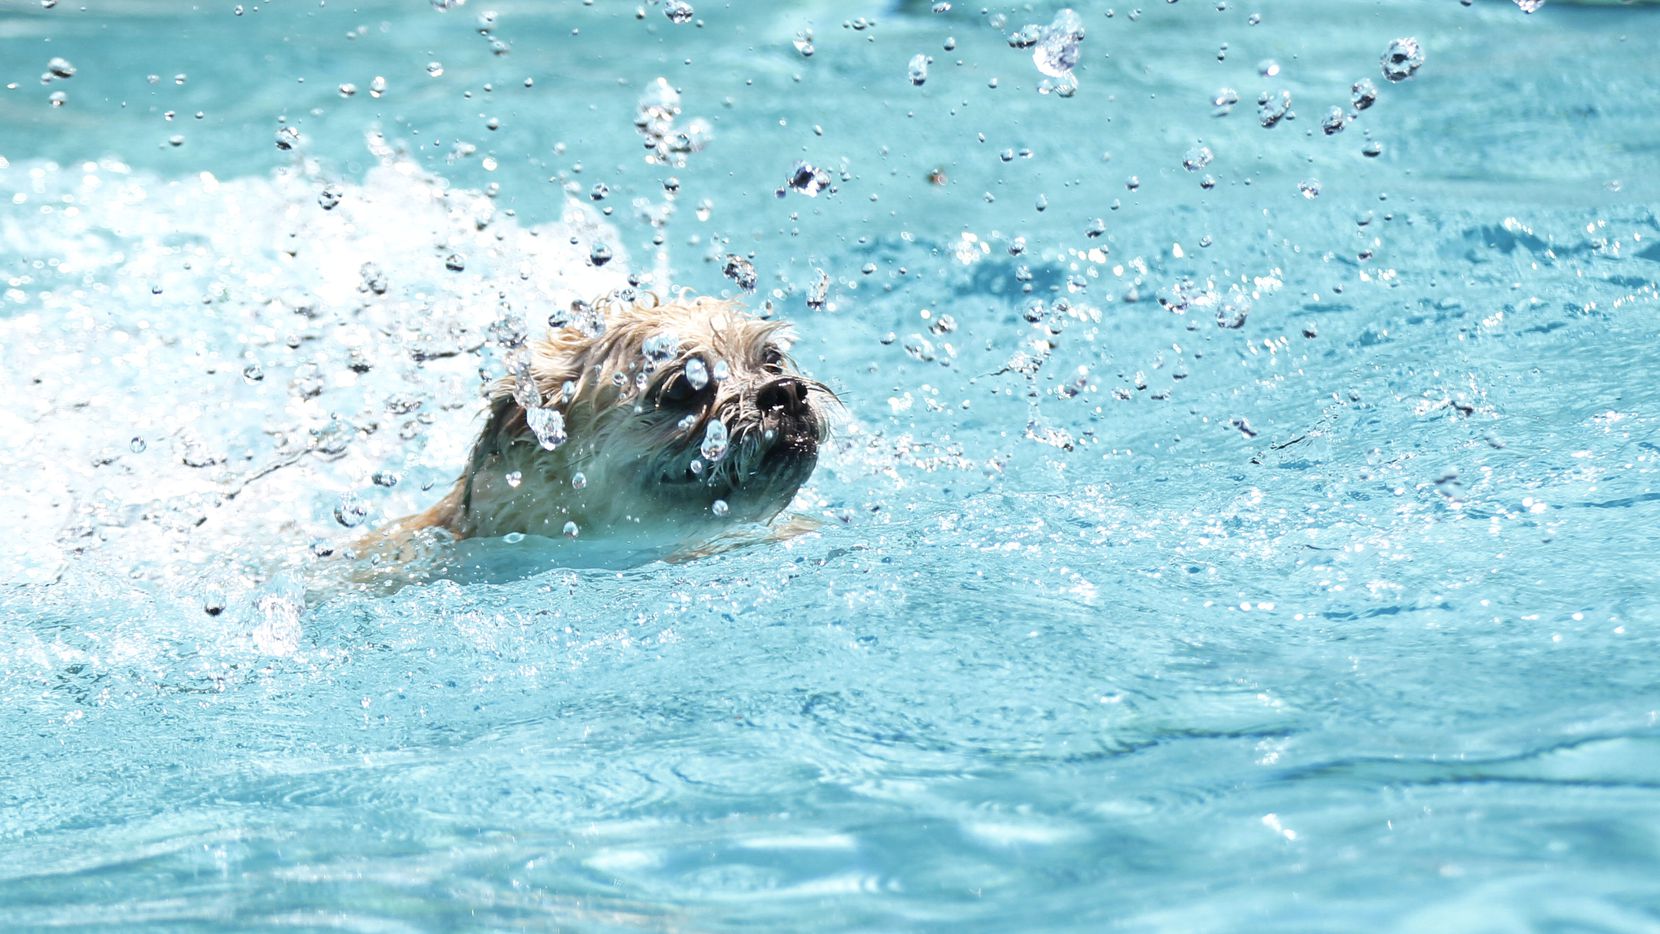 A dog jumps into the water during a swim day for dogs.